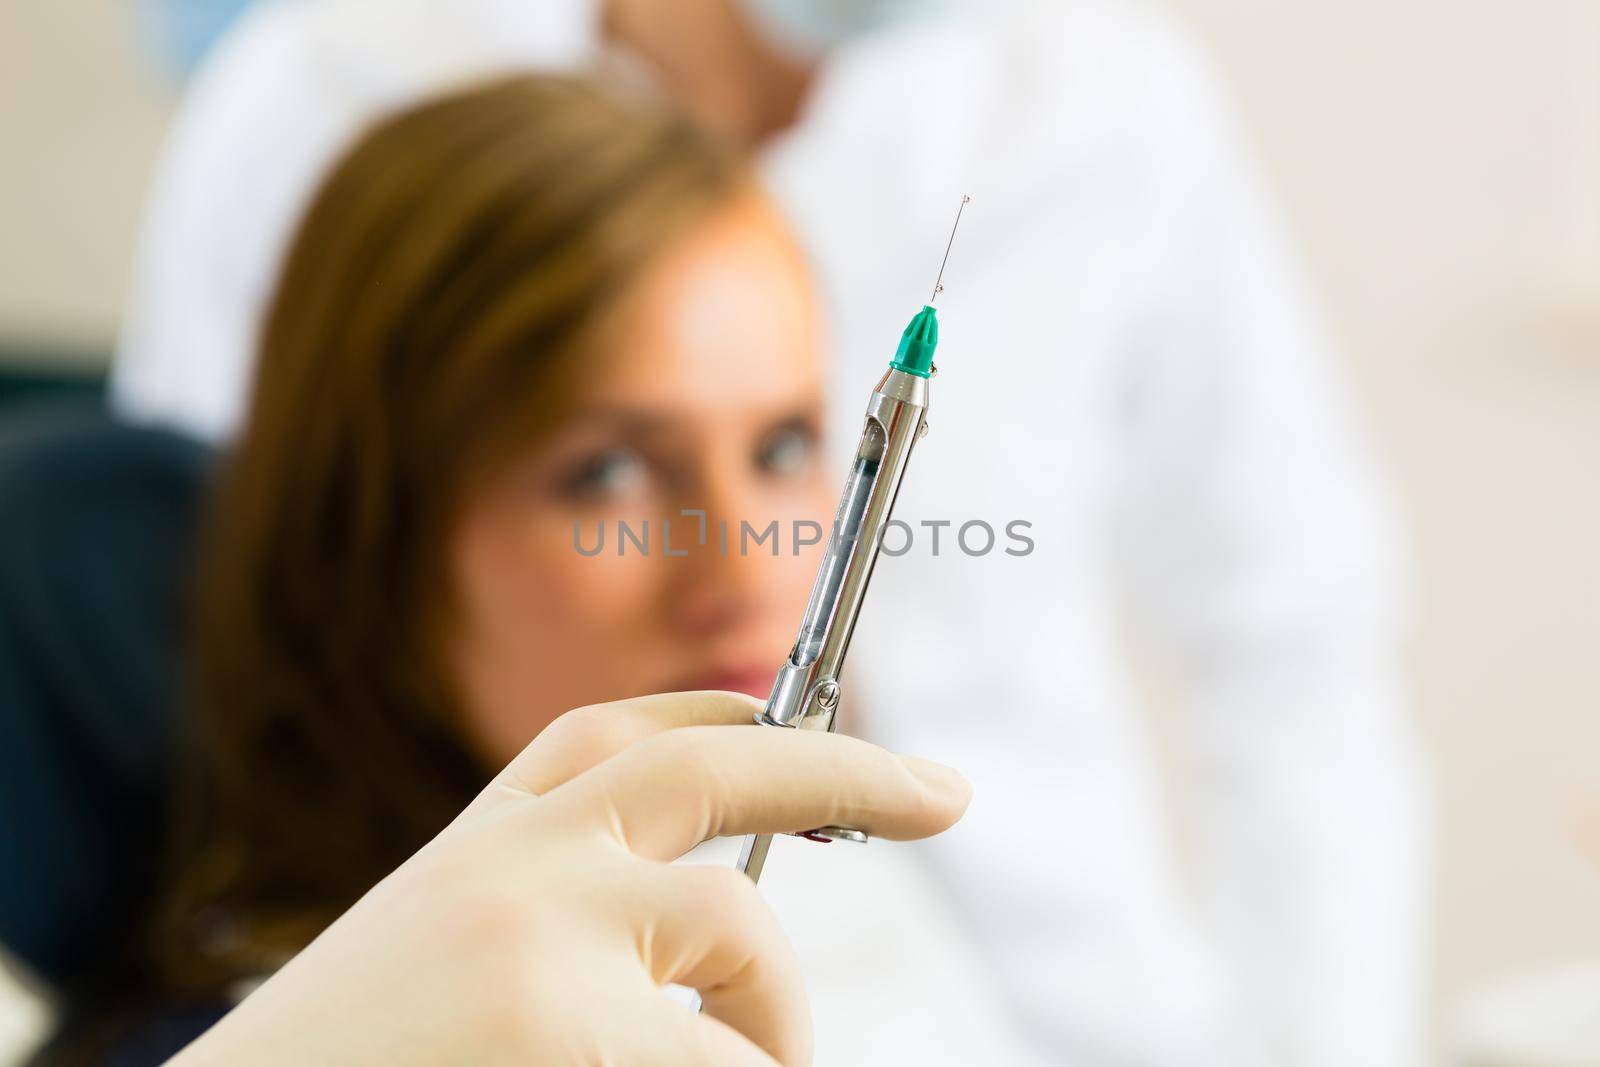 dentist holding a syringe, patient and dental assistant, are in the Background